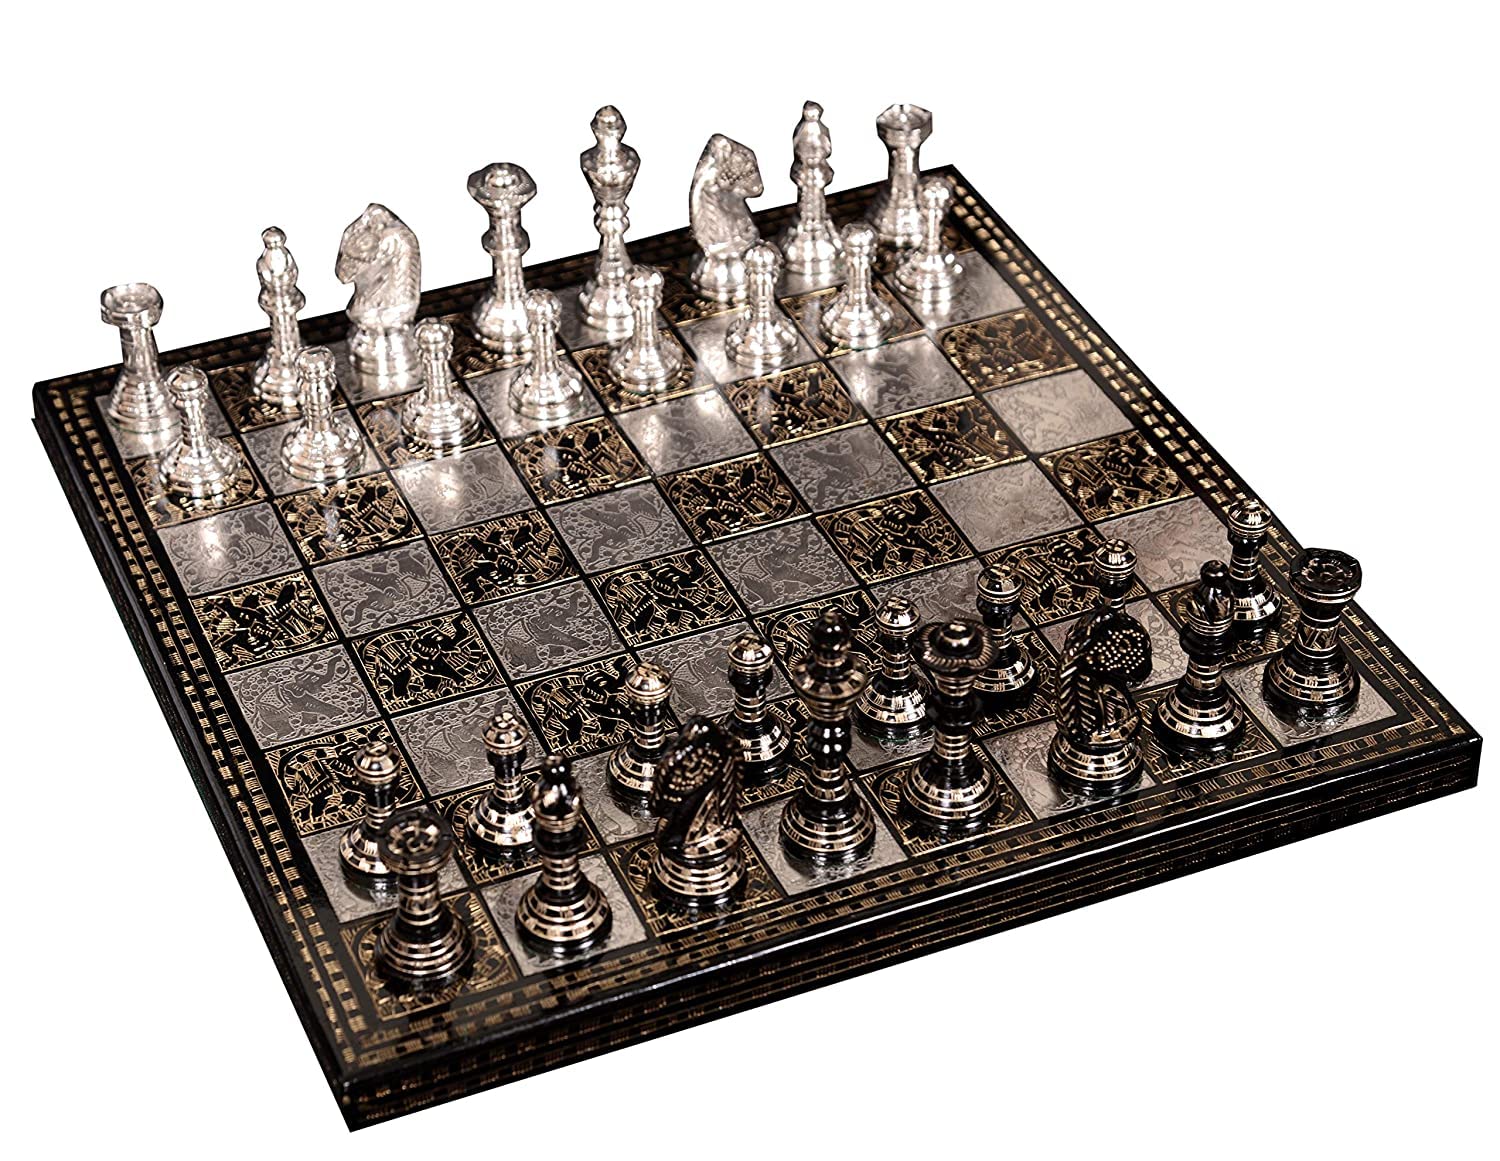 Shyam Antique Creation Collectible Premium Luxury Solid Metal Brass Chess Set for Adults Sets - Board Game Pieces 14Inx14In, Set, Silver & Black, 14X14X5 Inches